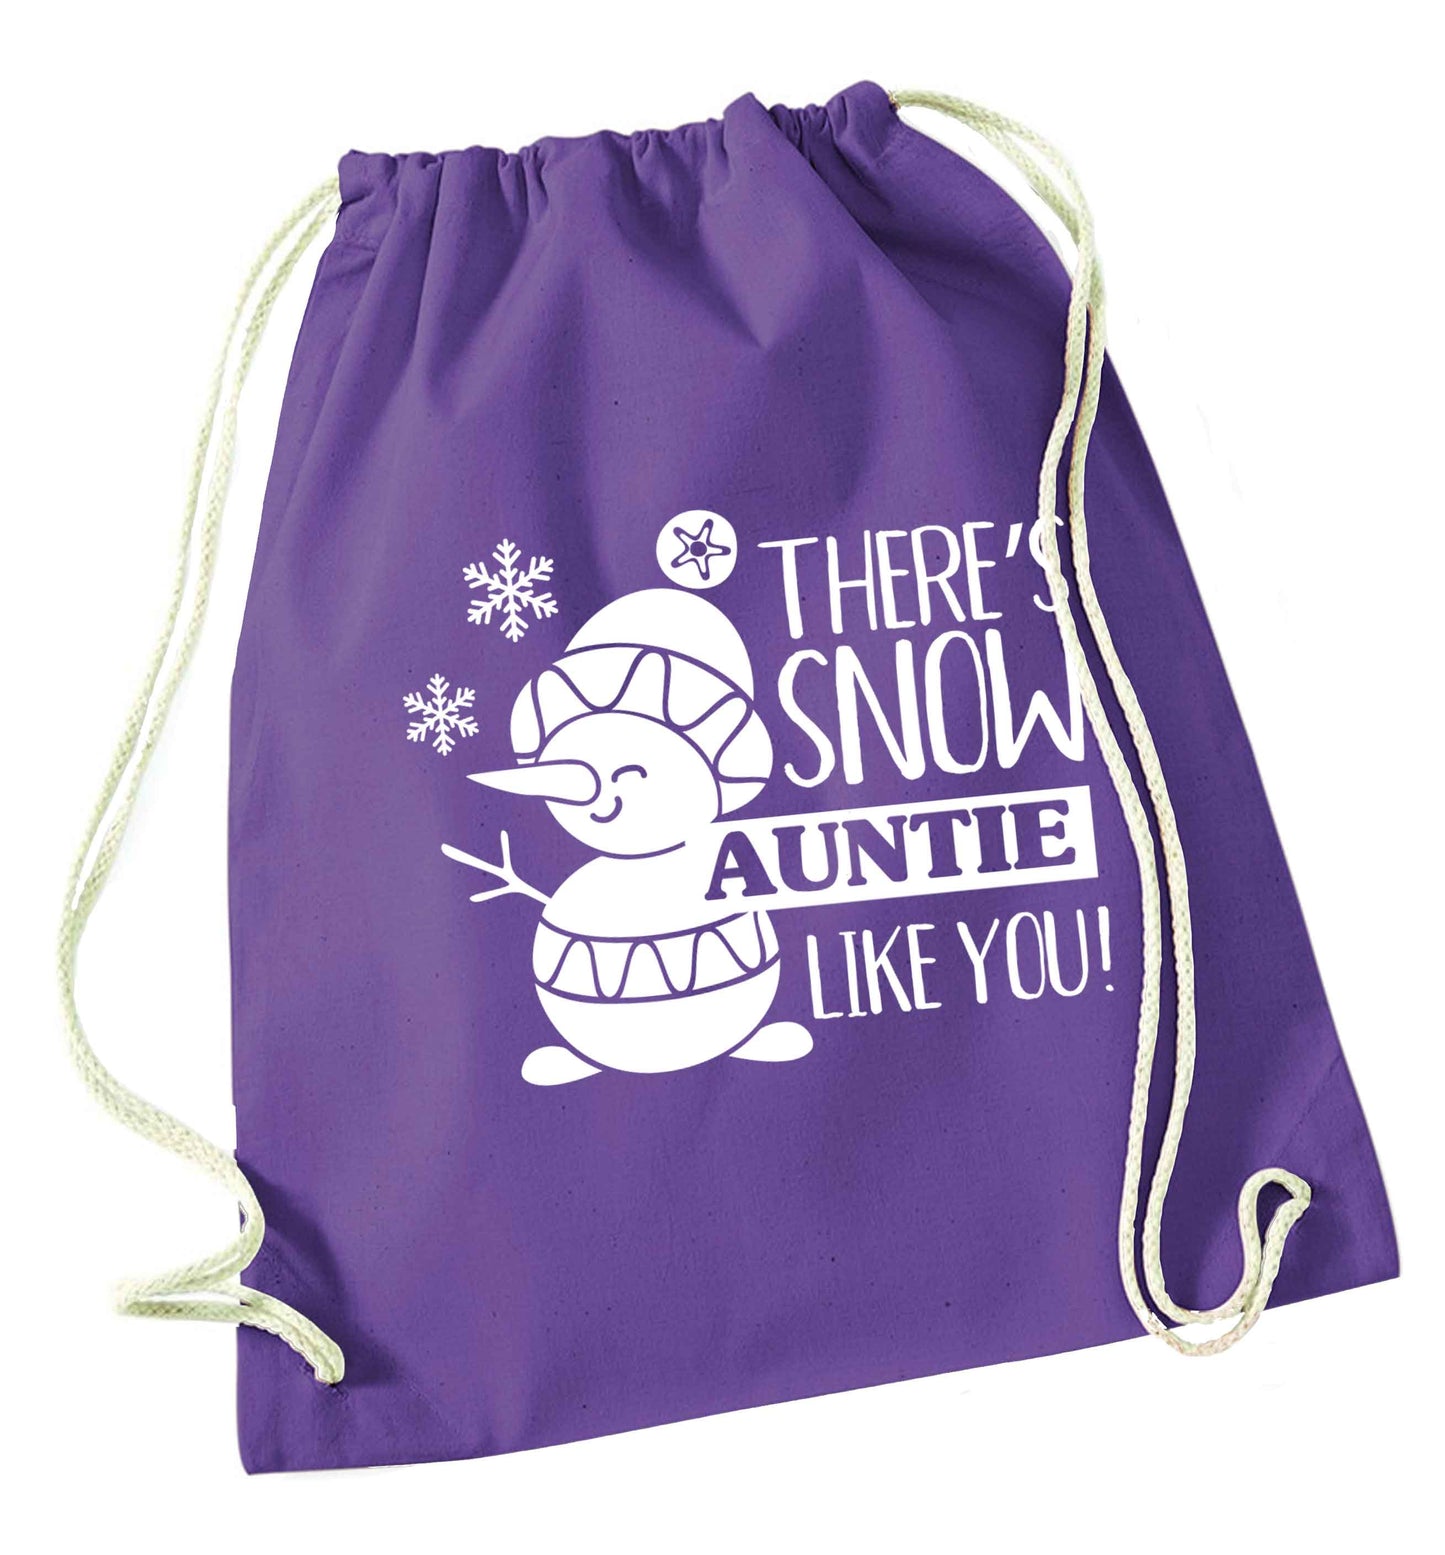 There's snow auntie like you purple drawstring bag